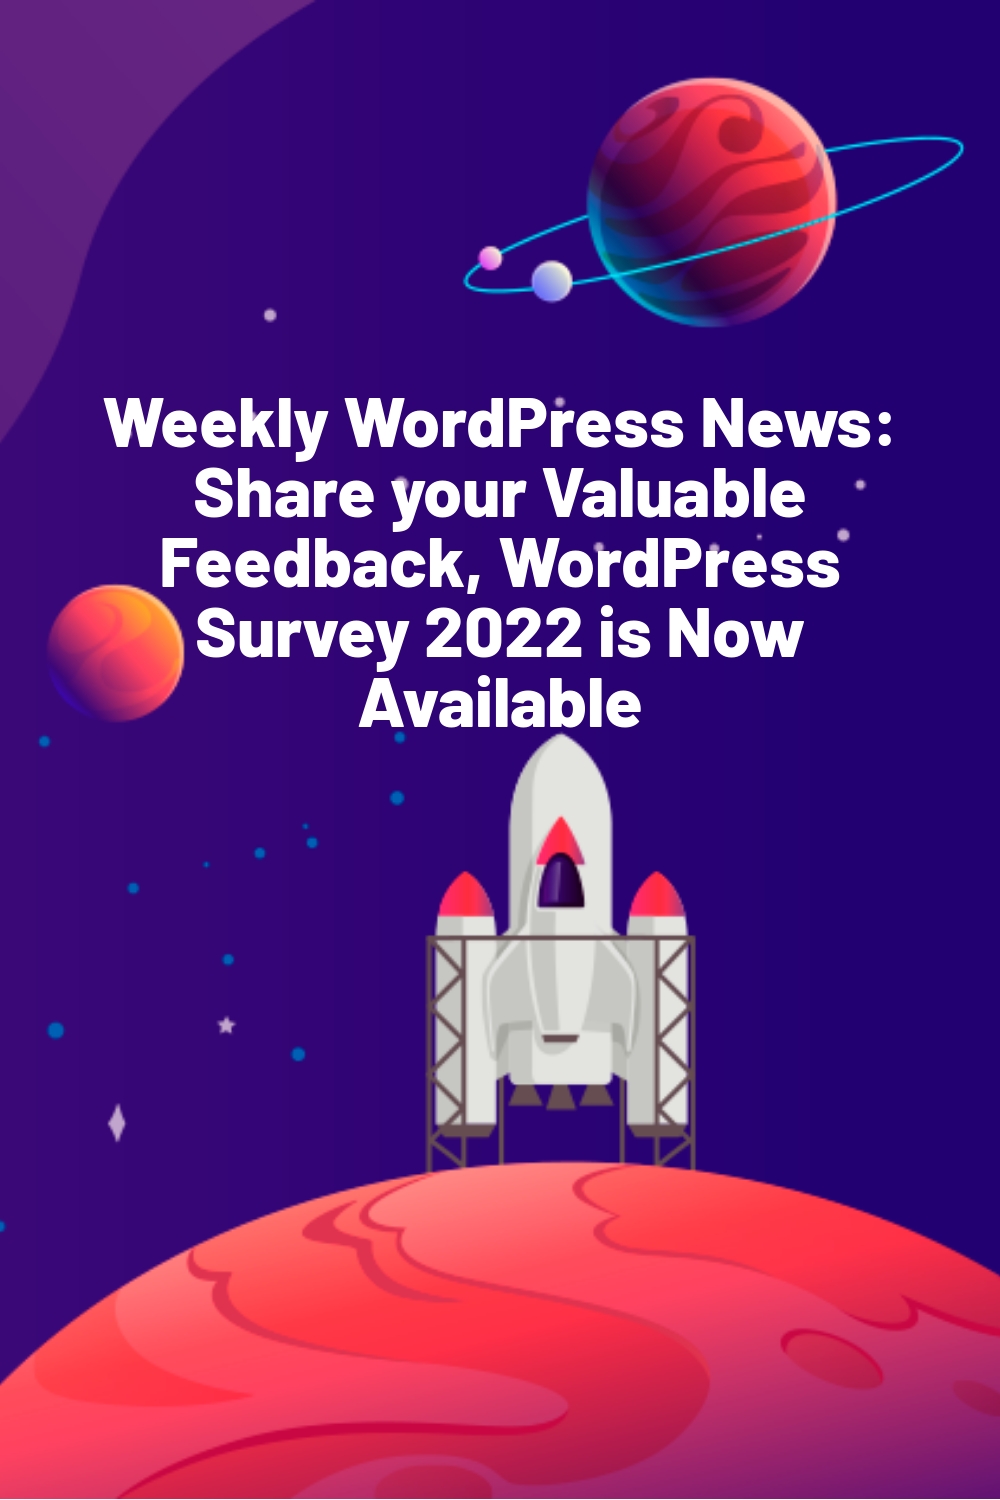 Weekly WordPress News: Share your Valuable Feedback, WordPress Survey 2022 is Now Available